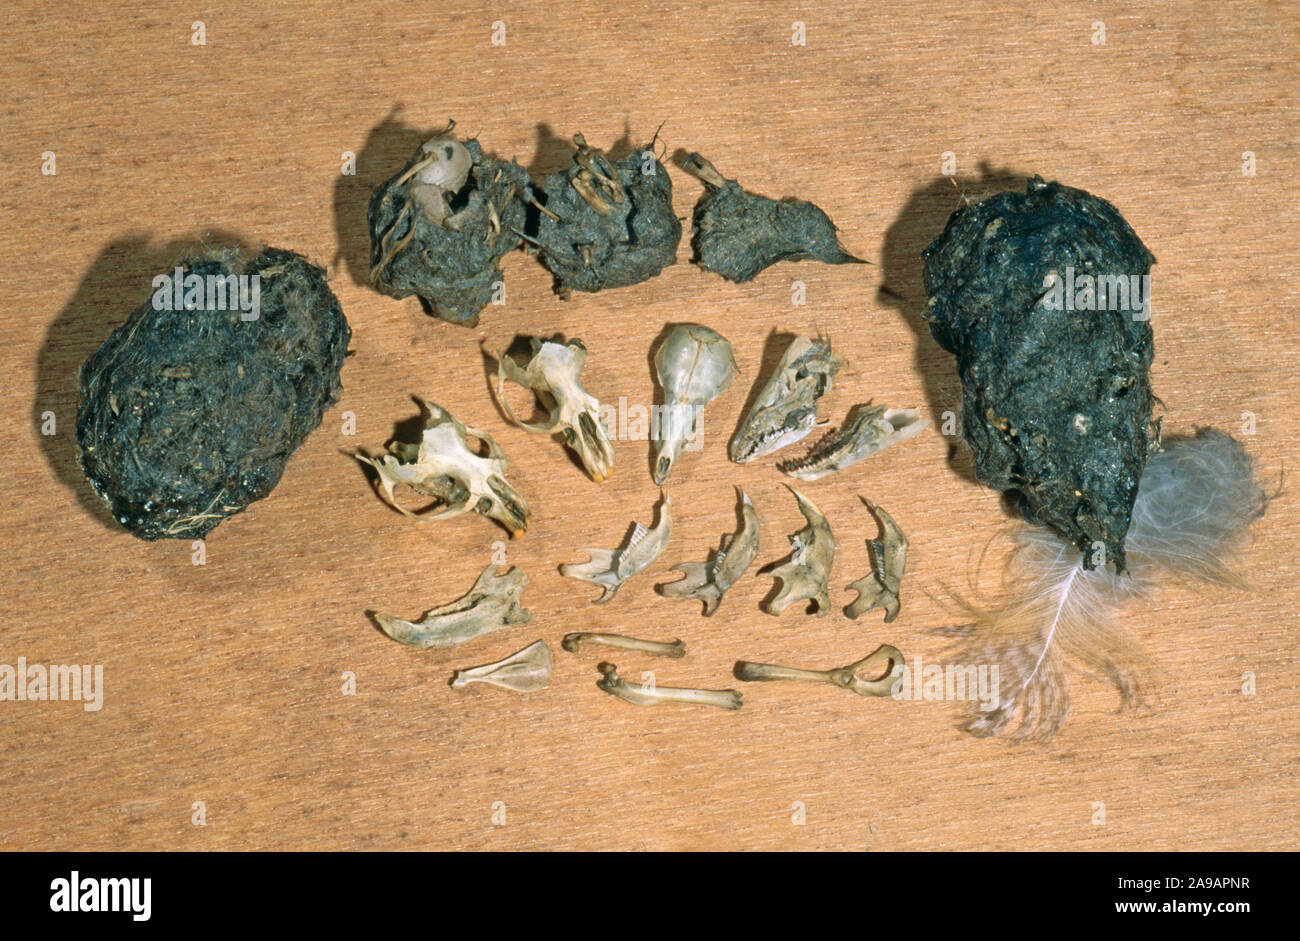 BARN OWL (Tyto alba). Owl pellets collected from under a daytime roost. Showing dissected bones, skulls and lower jaws of vole, wood mouse and shrews. Stock Photo